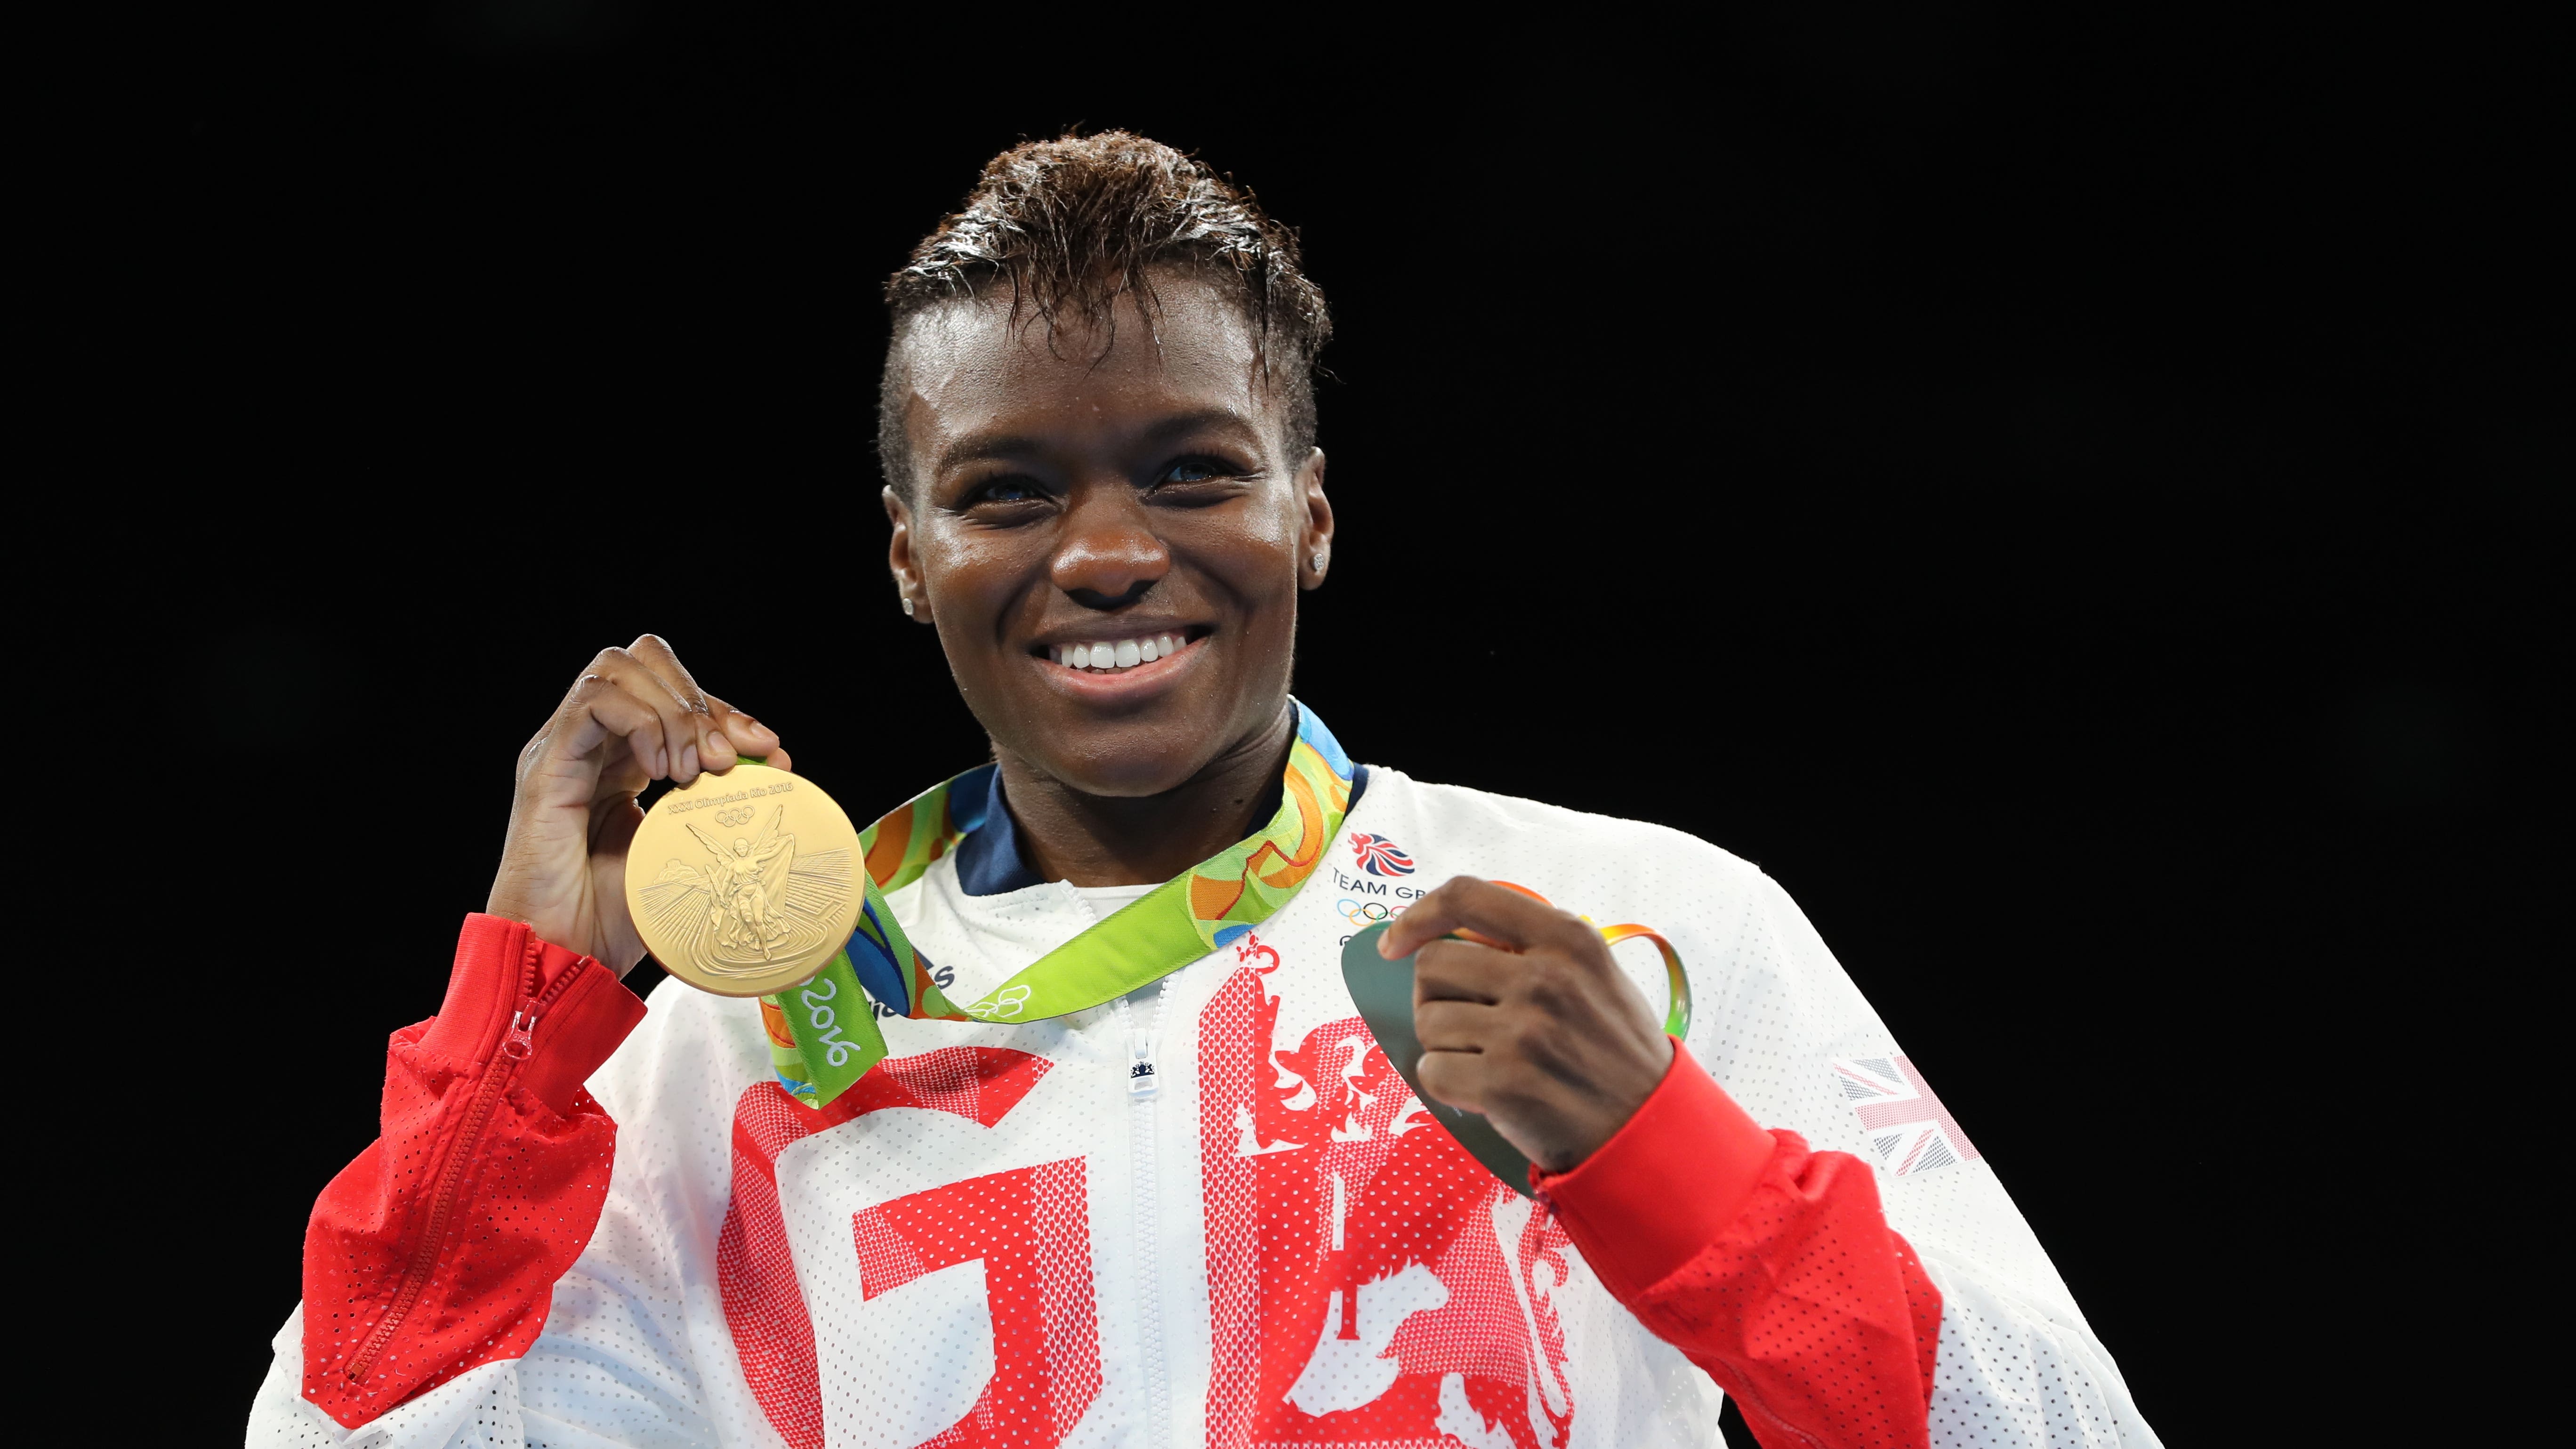 Olympic champion Nicola Adams hits out in boxing gender controversy